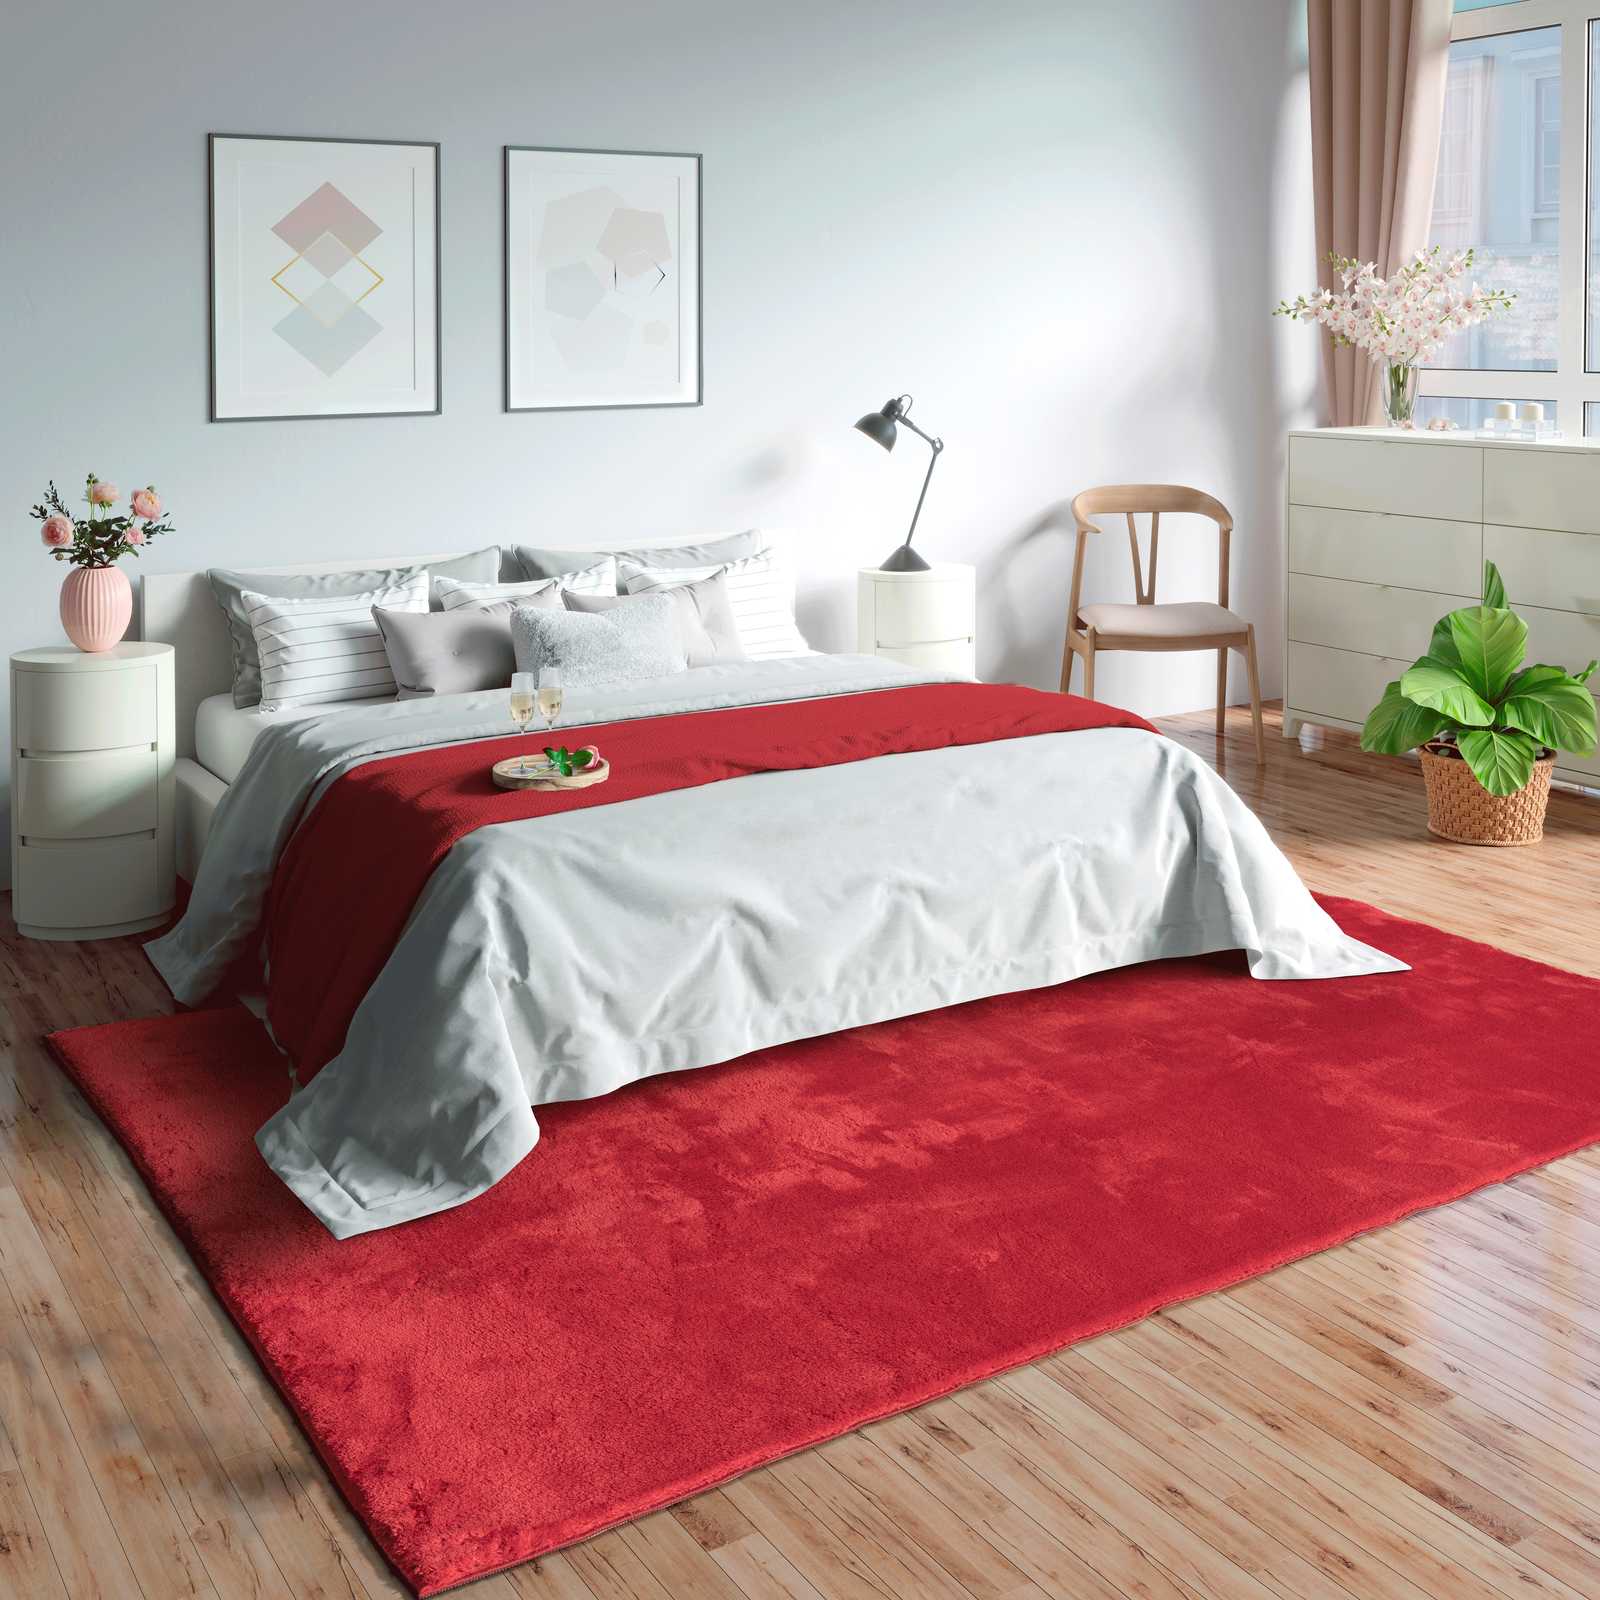         Extra soft high pile carpet in red - 110 x 60 cm
    